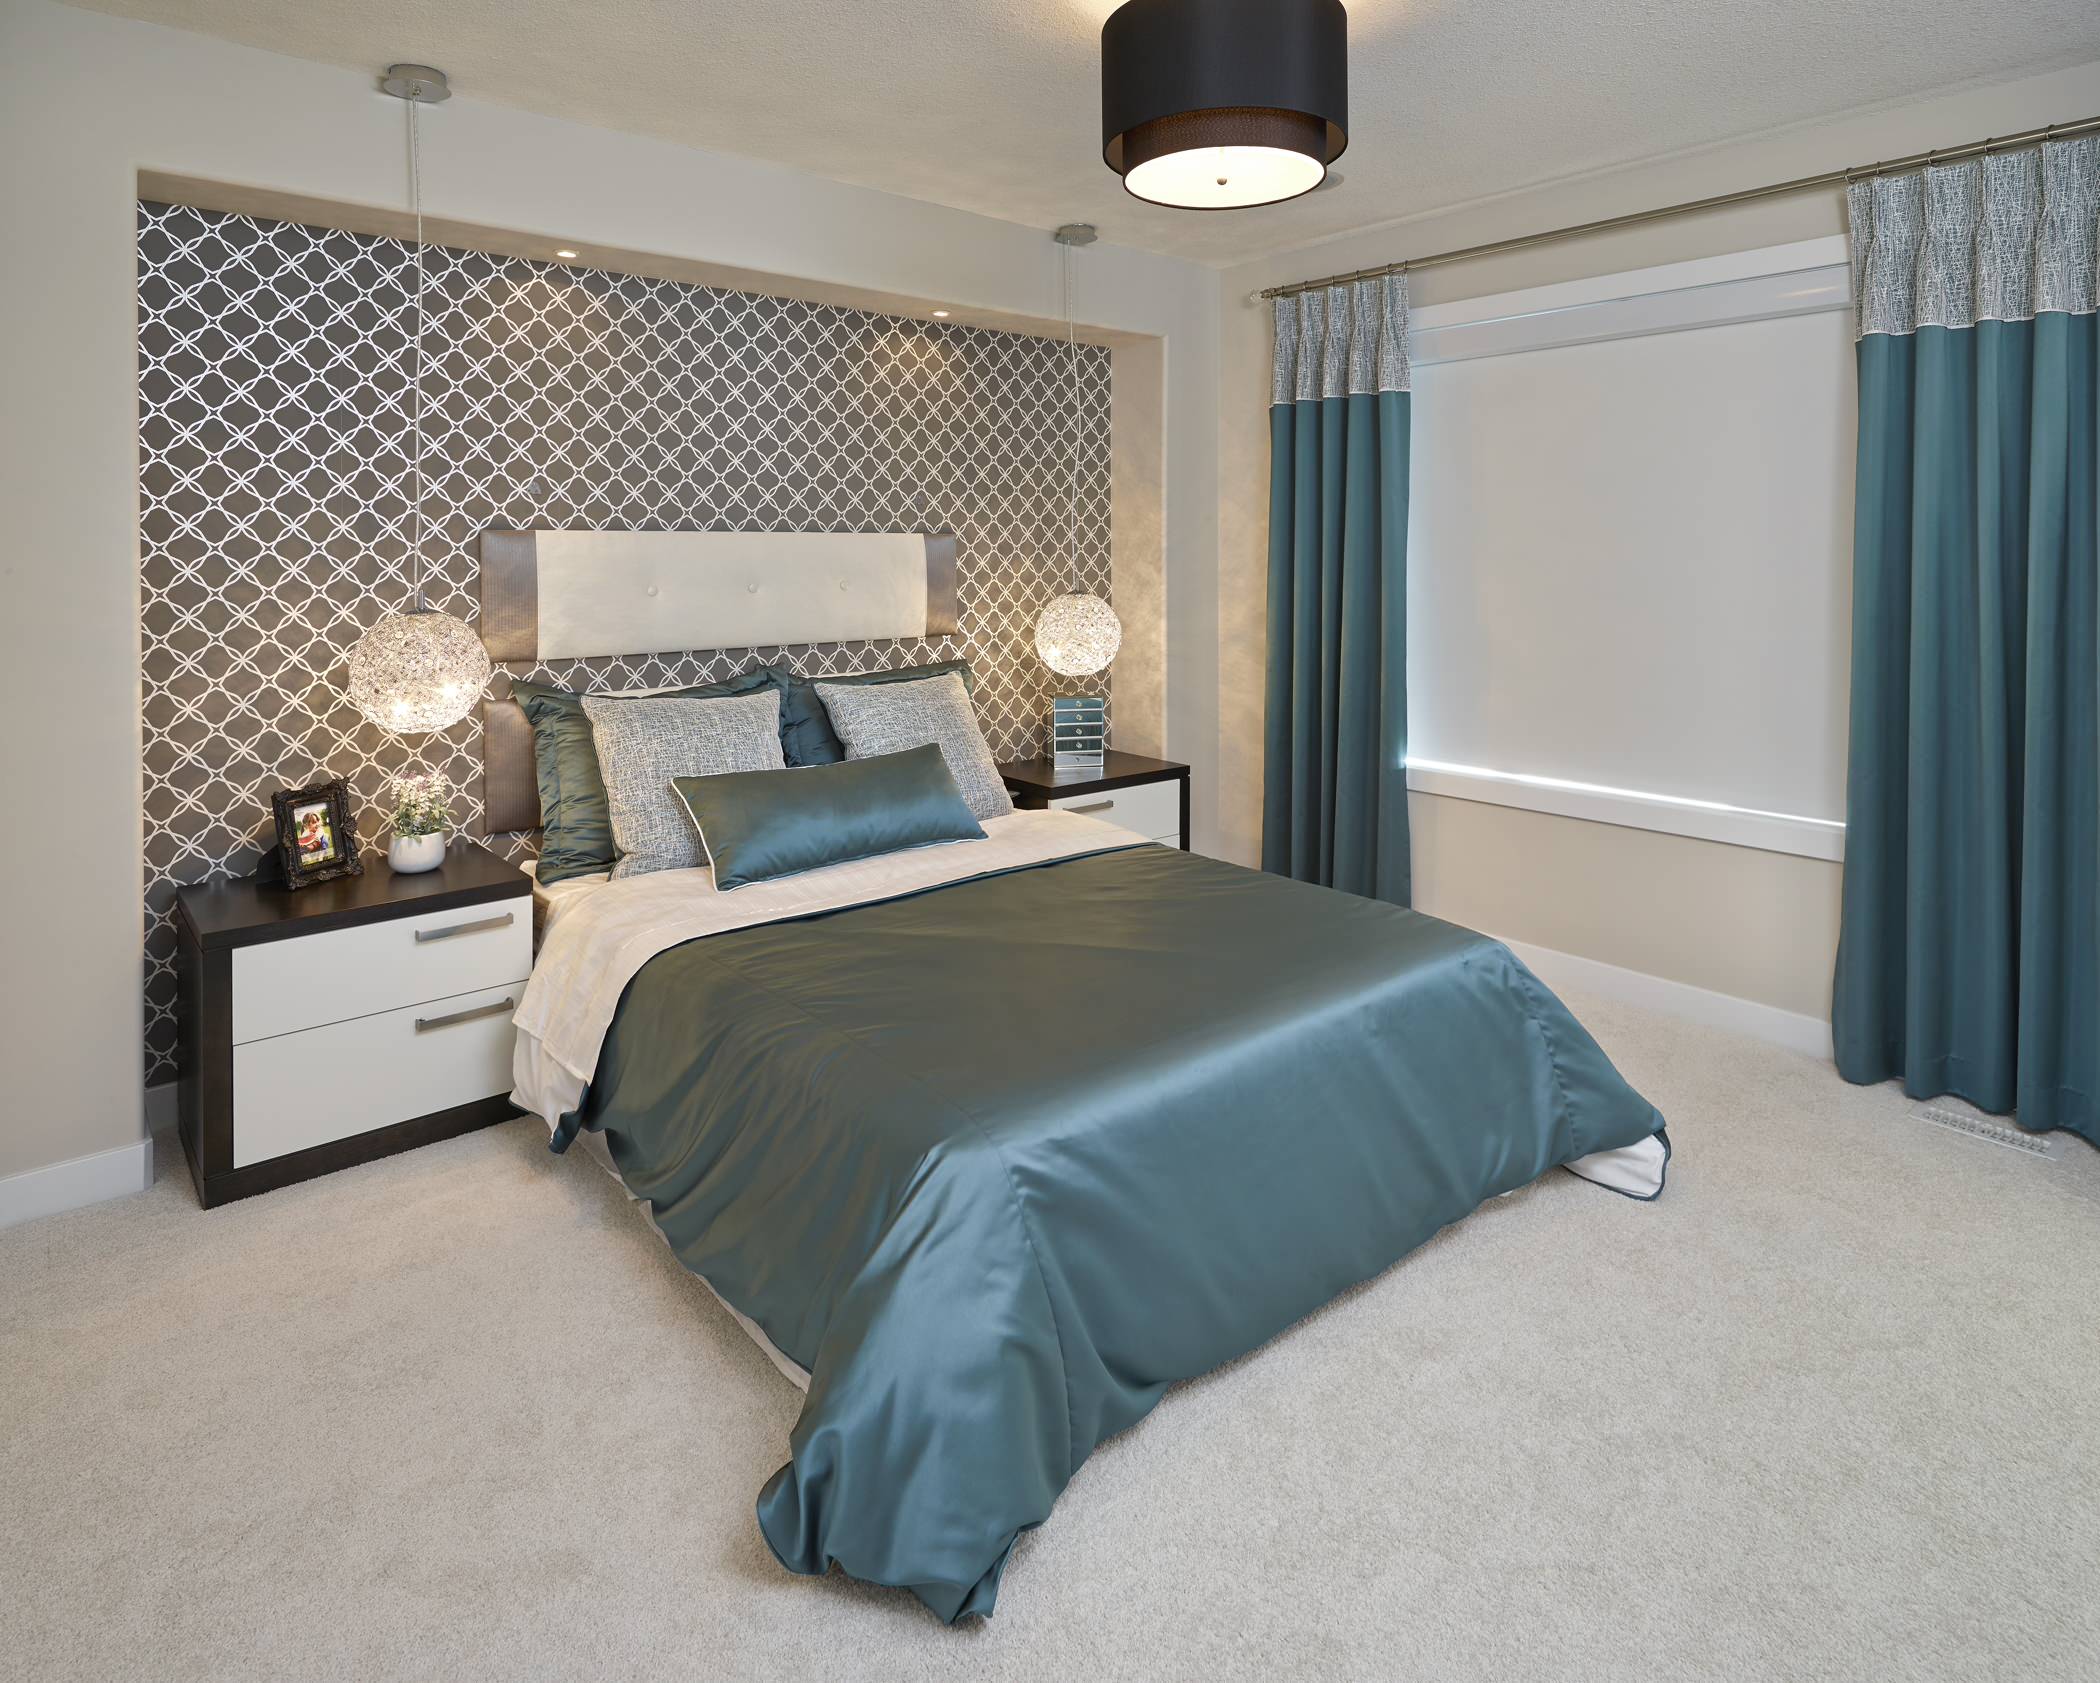 Nice teal and grey bedroom ideas Turquoise And Gray Bedroom Ideas Photos Houzz